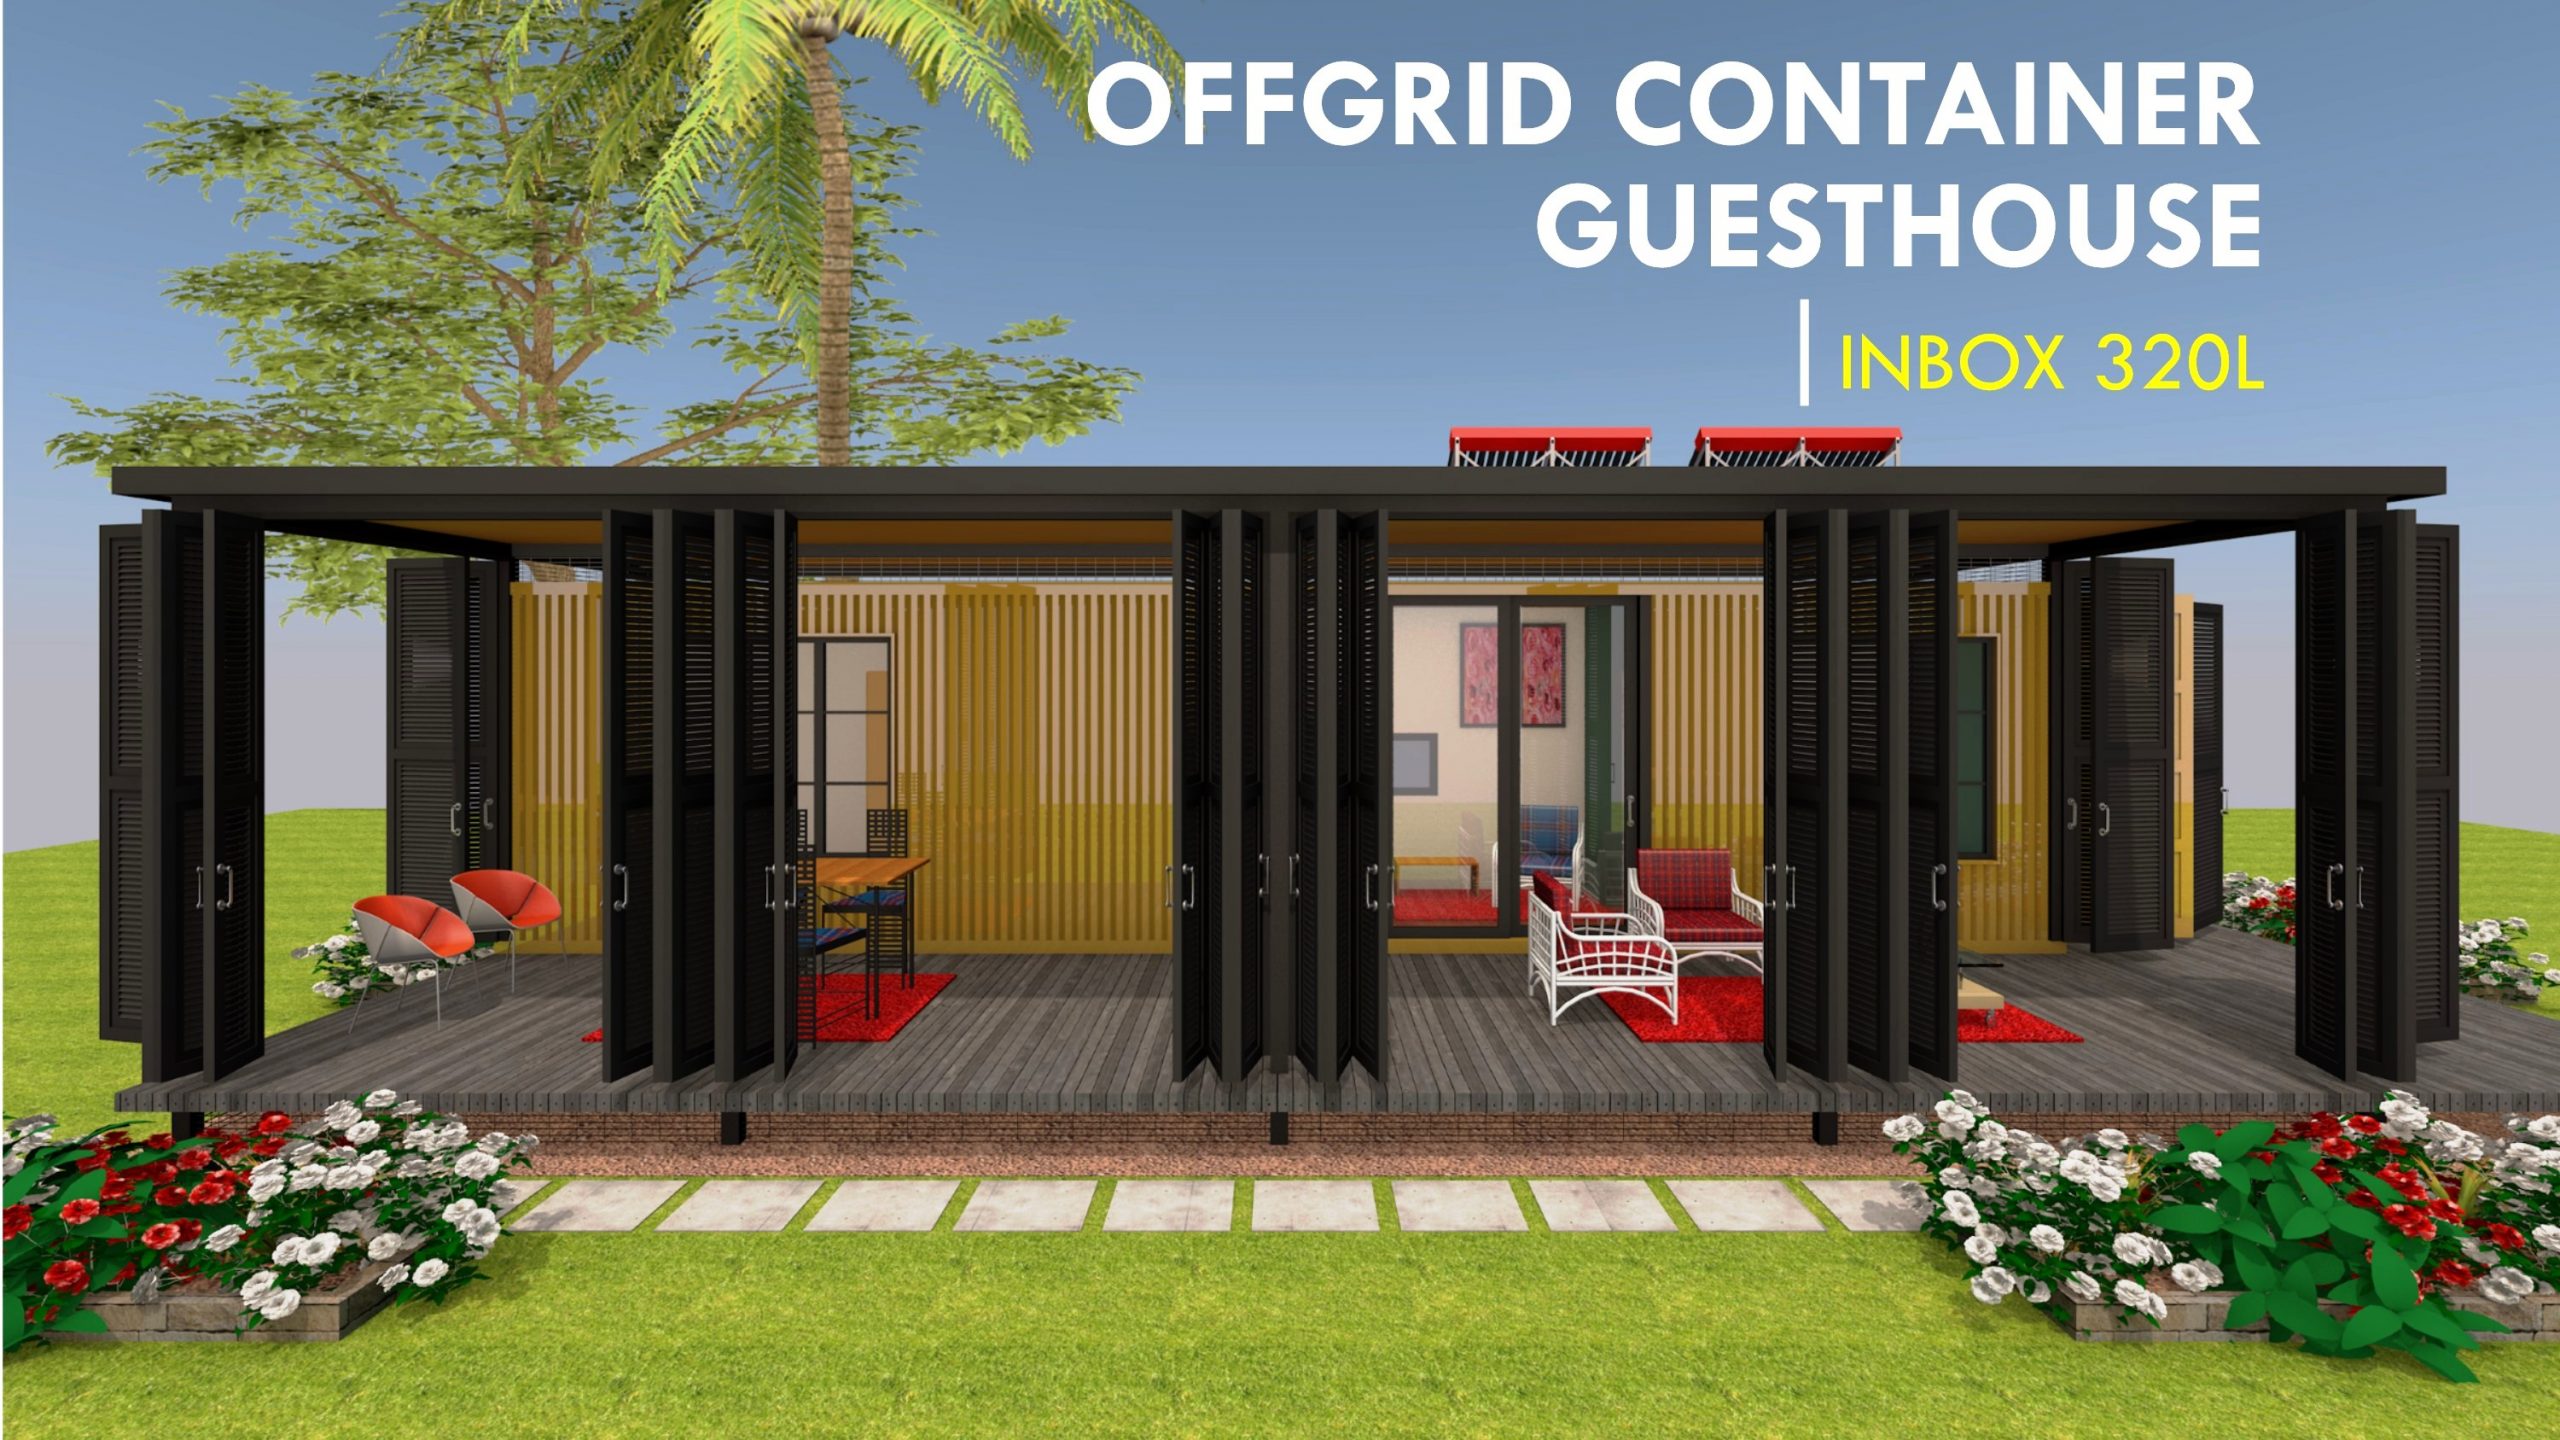 An Amazing Off-grid Shipping Container Guesthouse Design with Floor plans | GUESTBOX 320